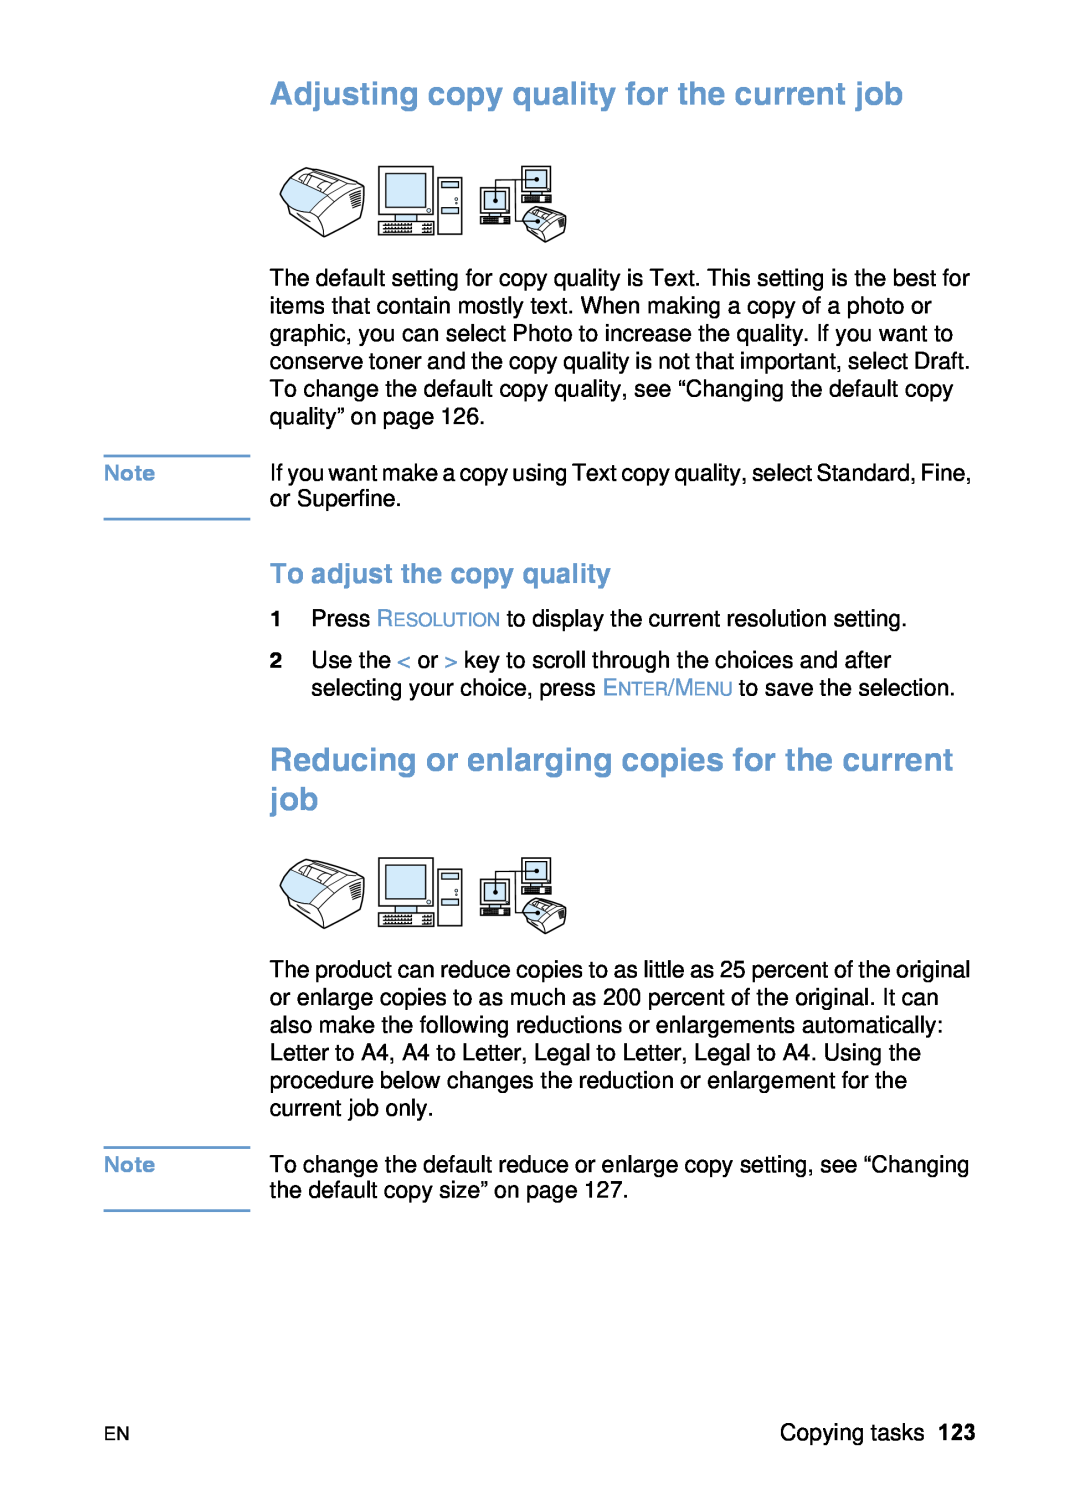 HP 3200 manual Adjusting copy quality for the current job, Reducing or enlarging copies for the current job 